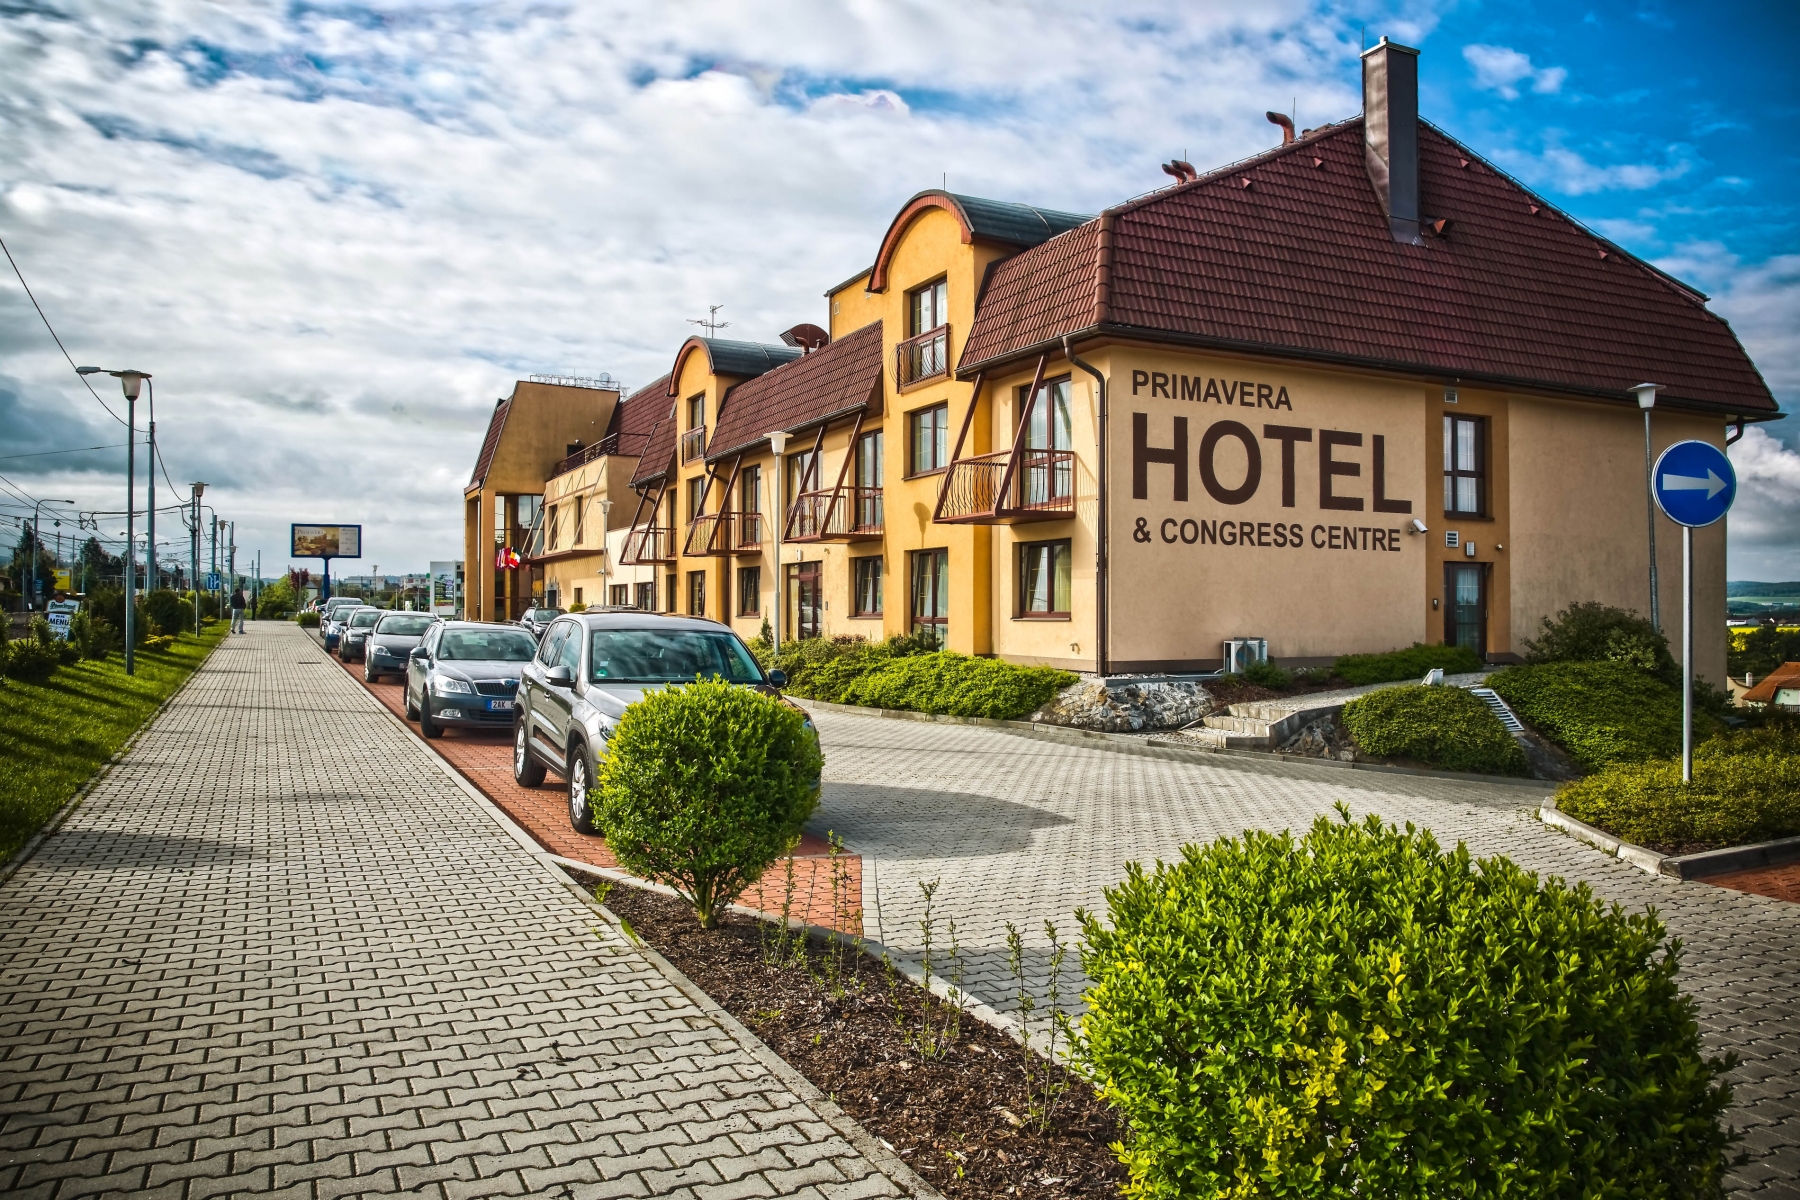 PRIMAVERA Hotel & Congress centre <br/>64.83 ew <br/> <a href='http://vakantieoplossing.nl/outpage/?id=94e06fbe744b43ee86eaf111c7129a75' target='_blank'>View Details</a>